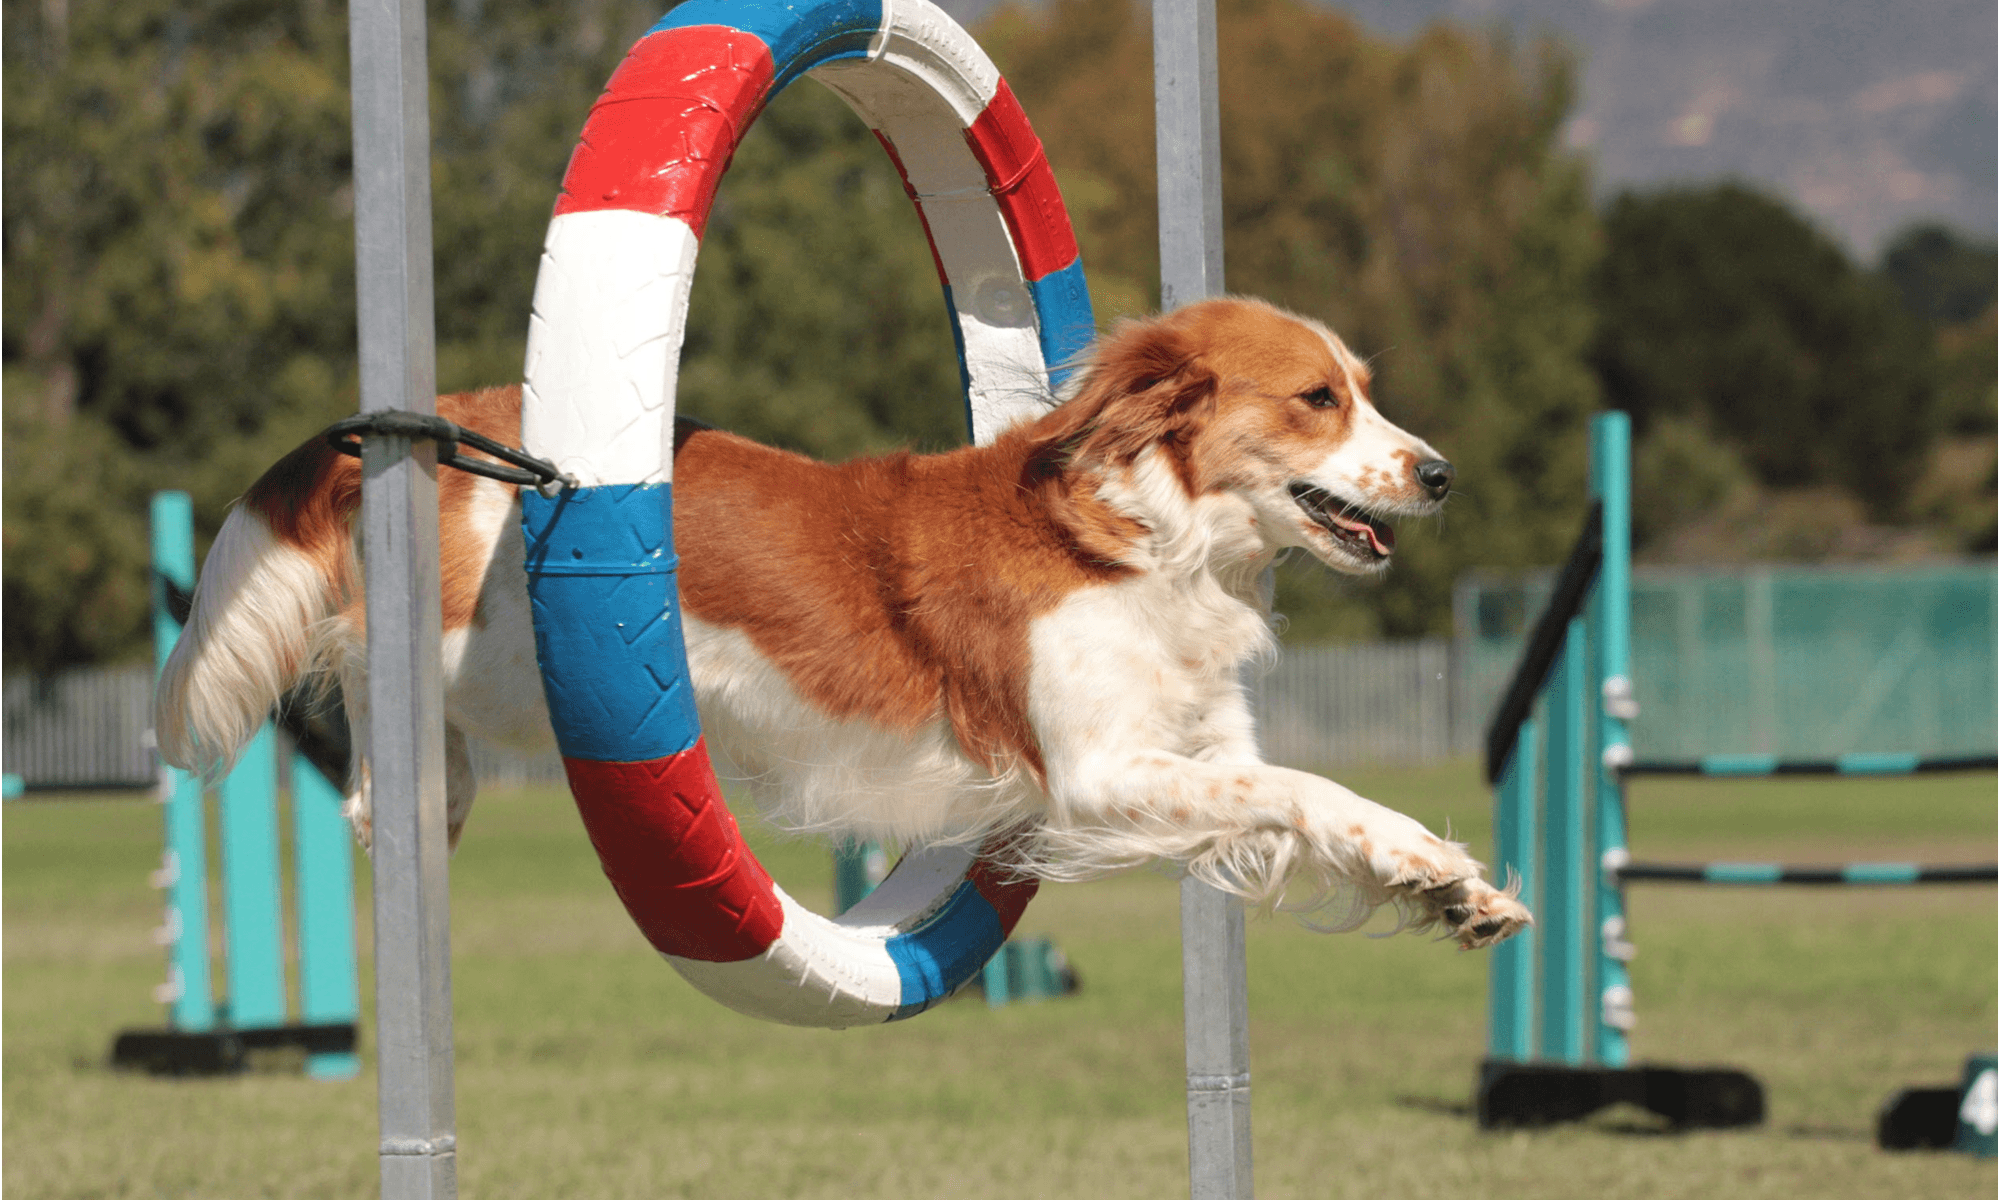 Puppy Agility Training - train and communicate with your dog